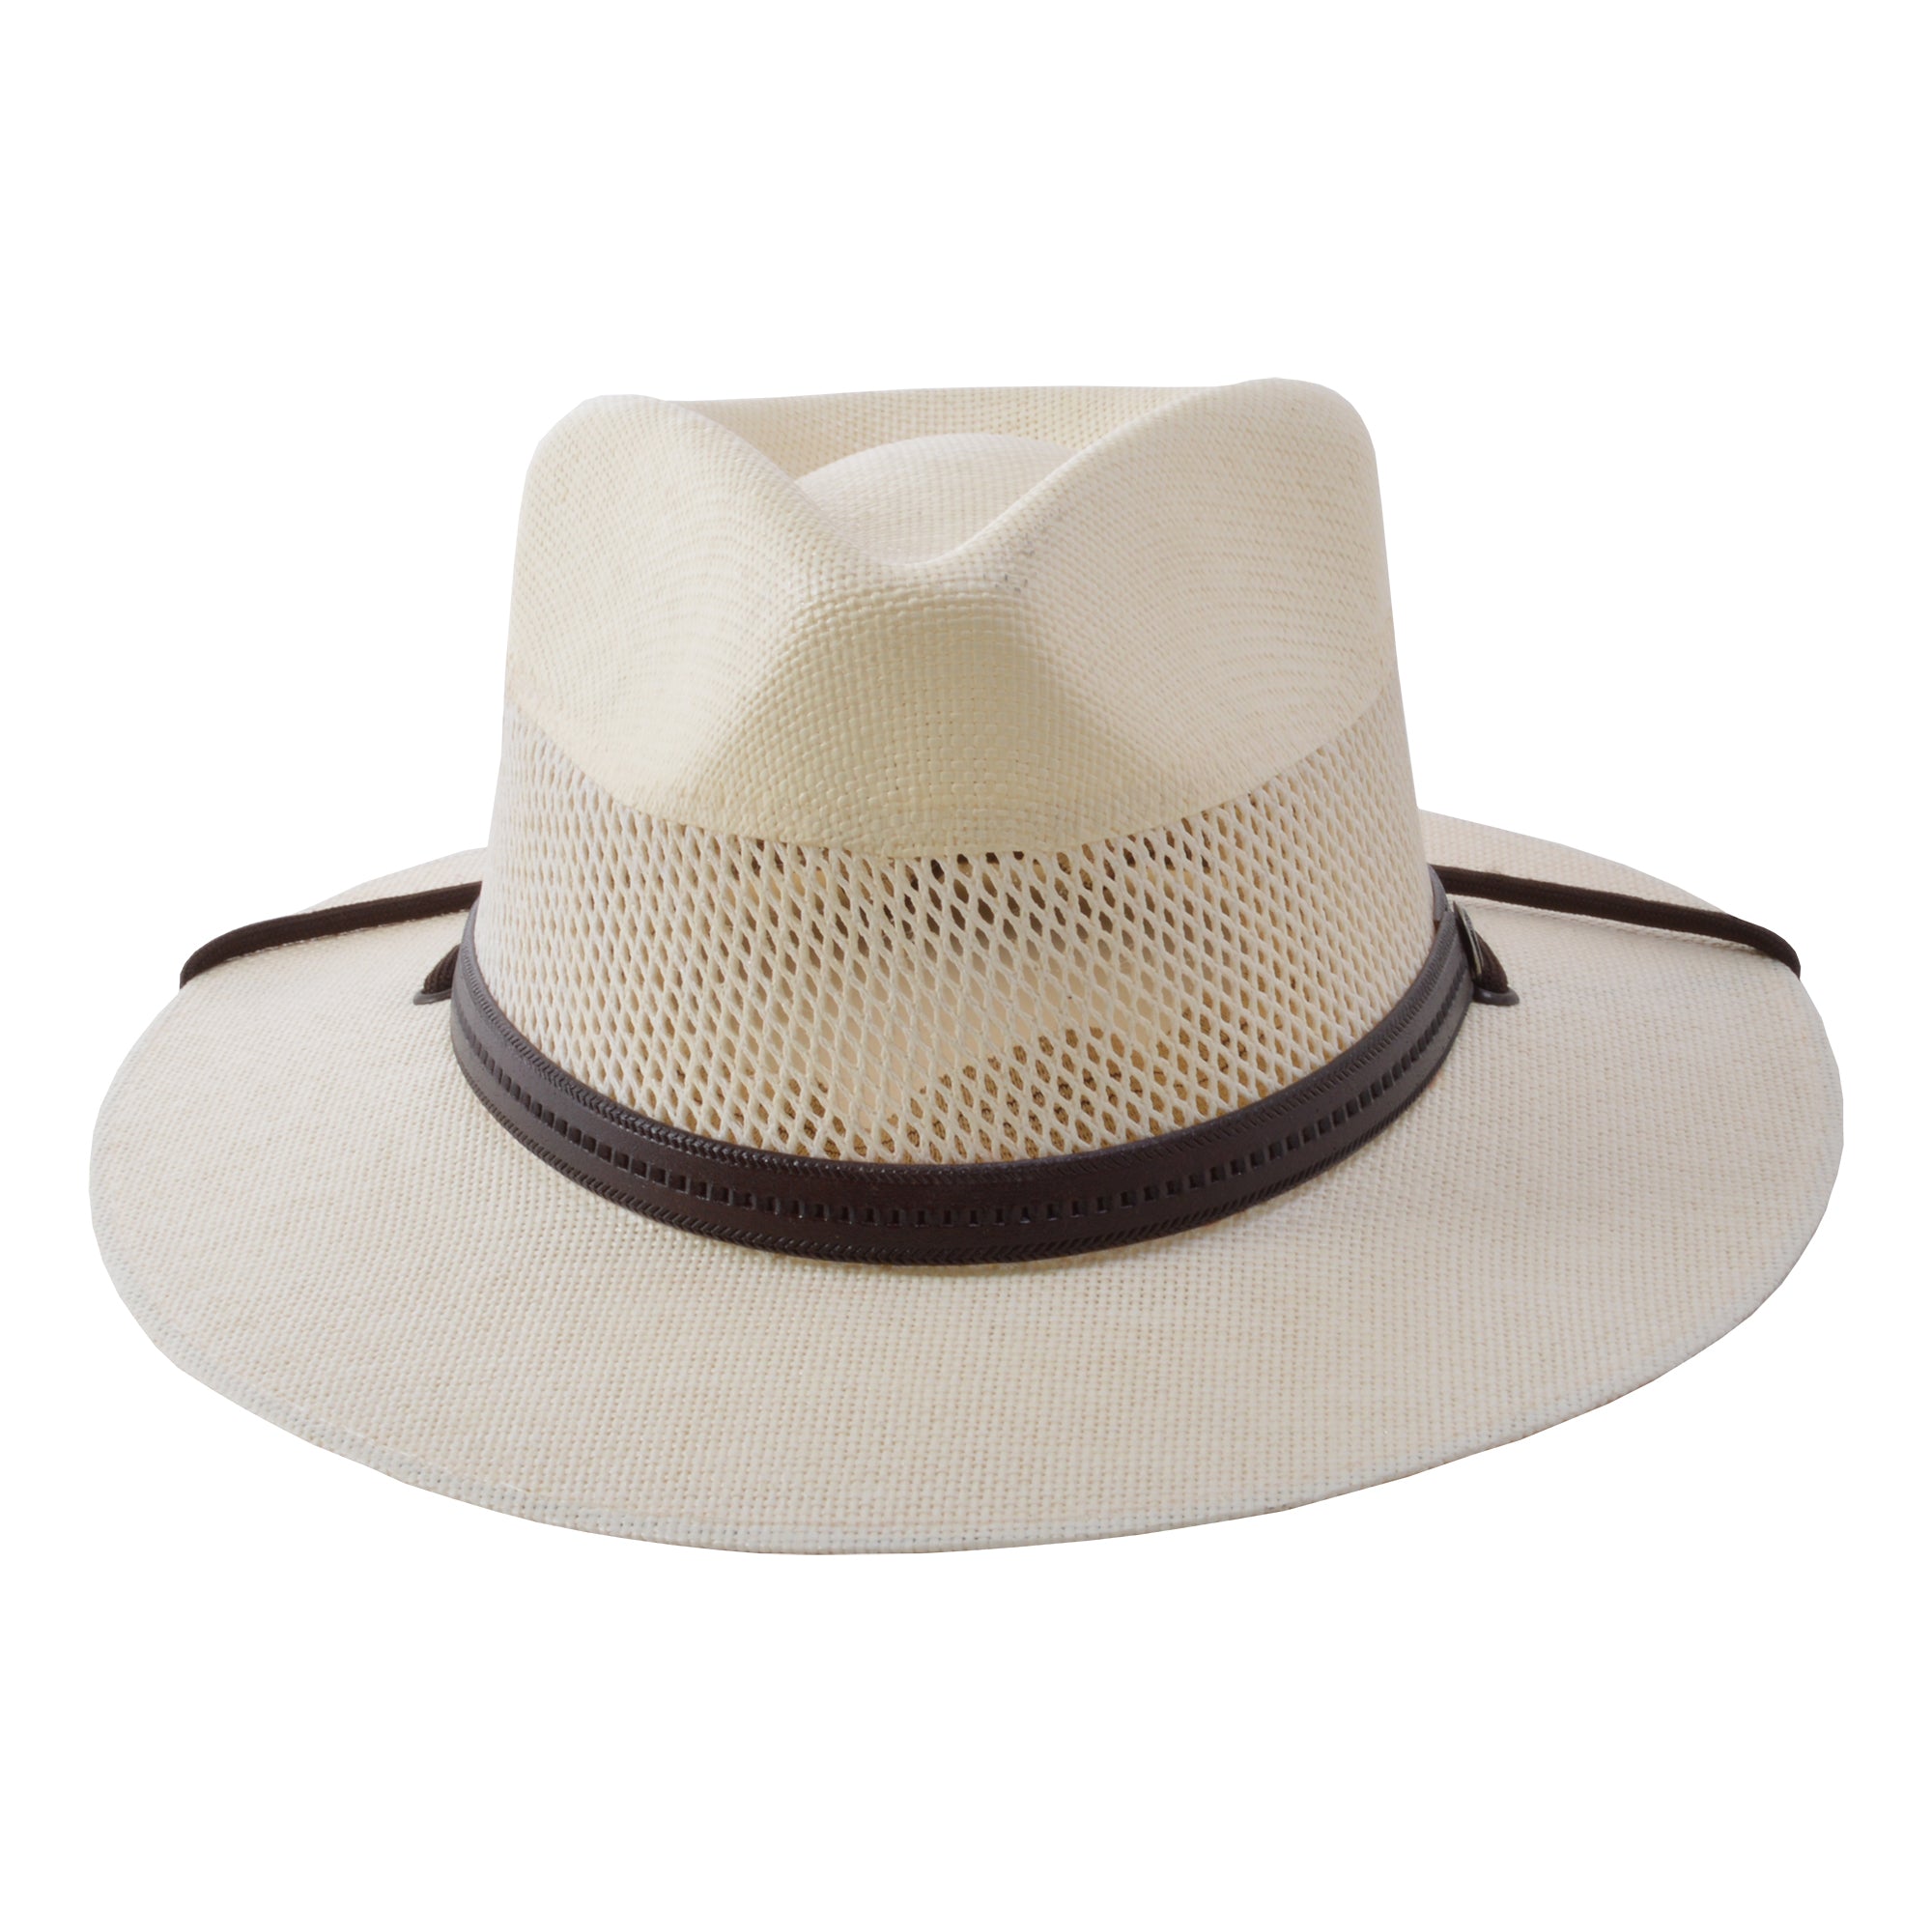 Stetson Afton Vented Canvas Straw Hat in Natural - 0